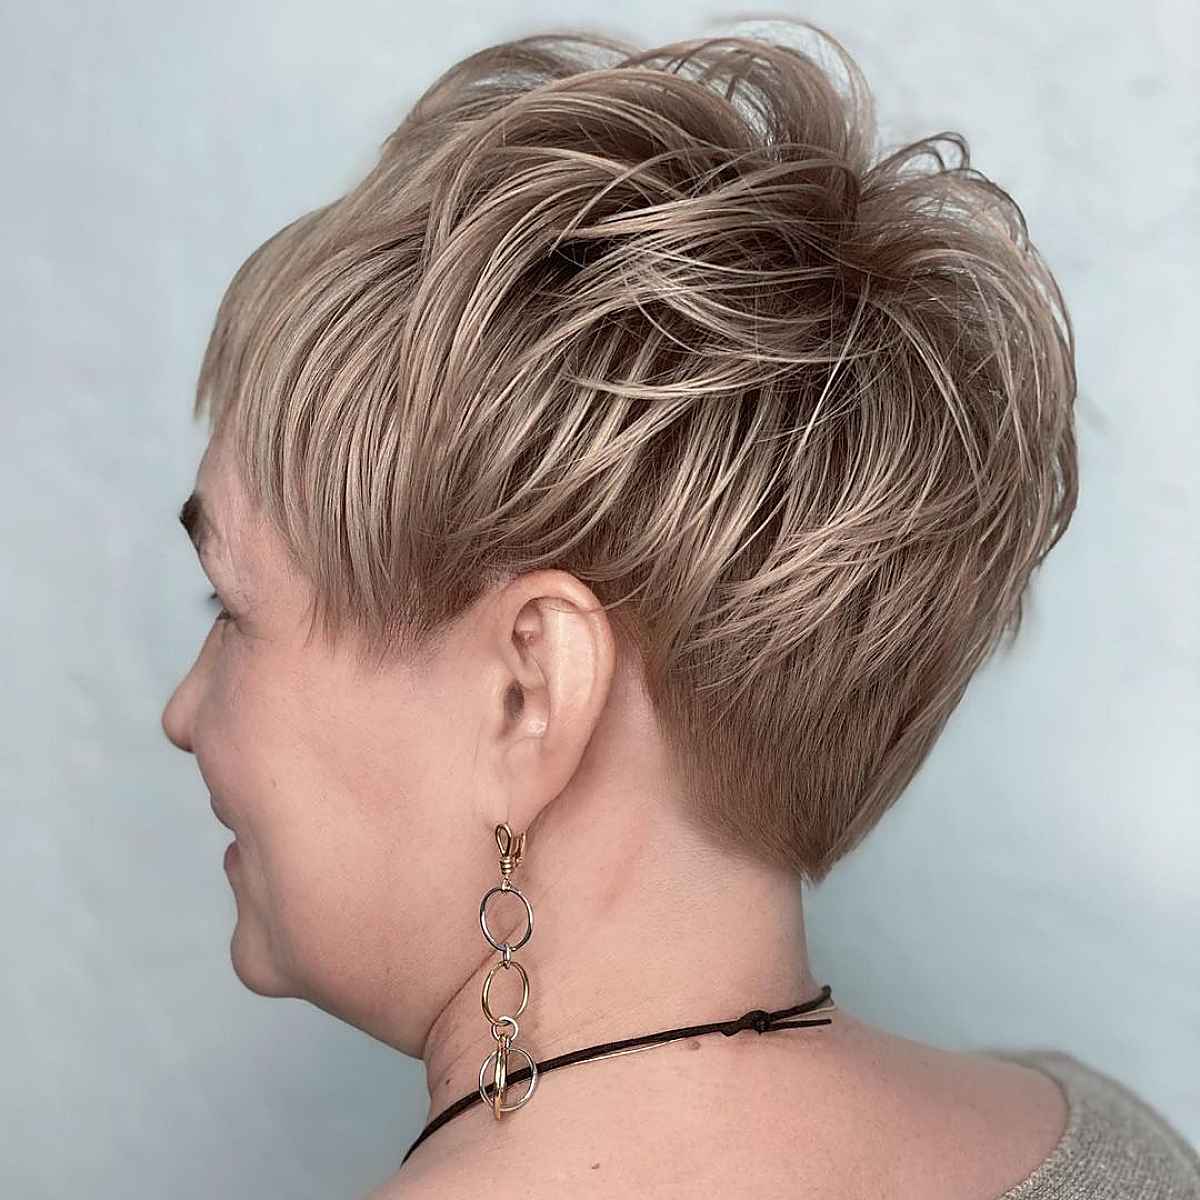 Choppy Pixie Cut with Layers